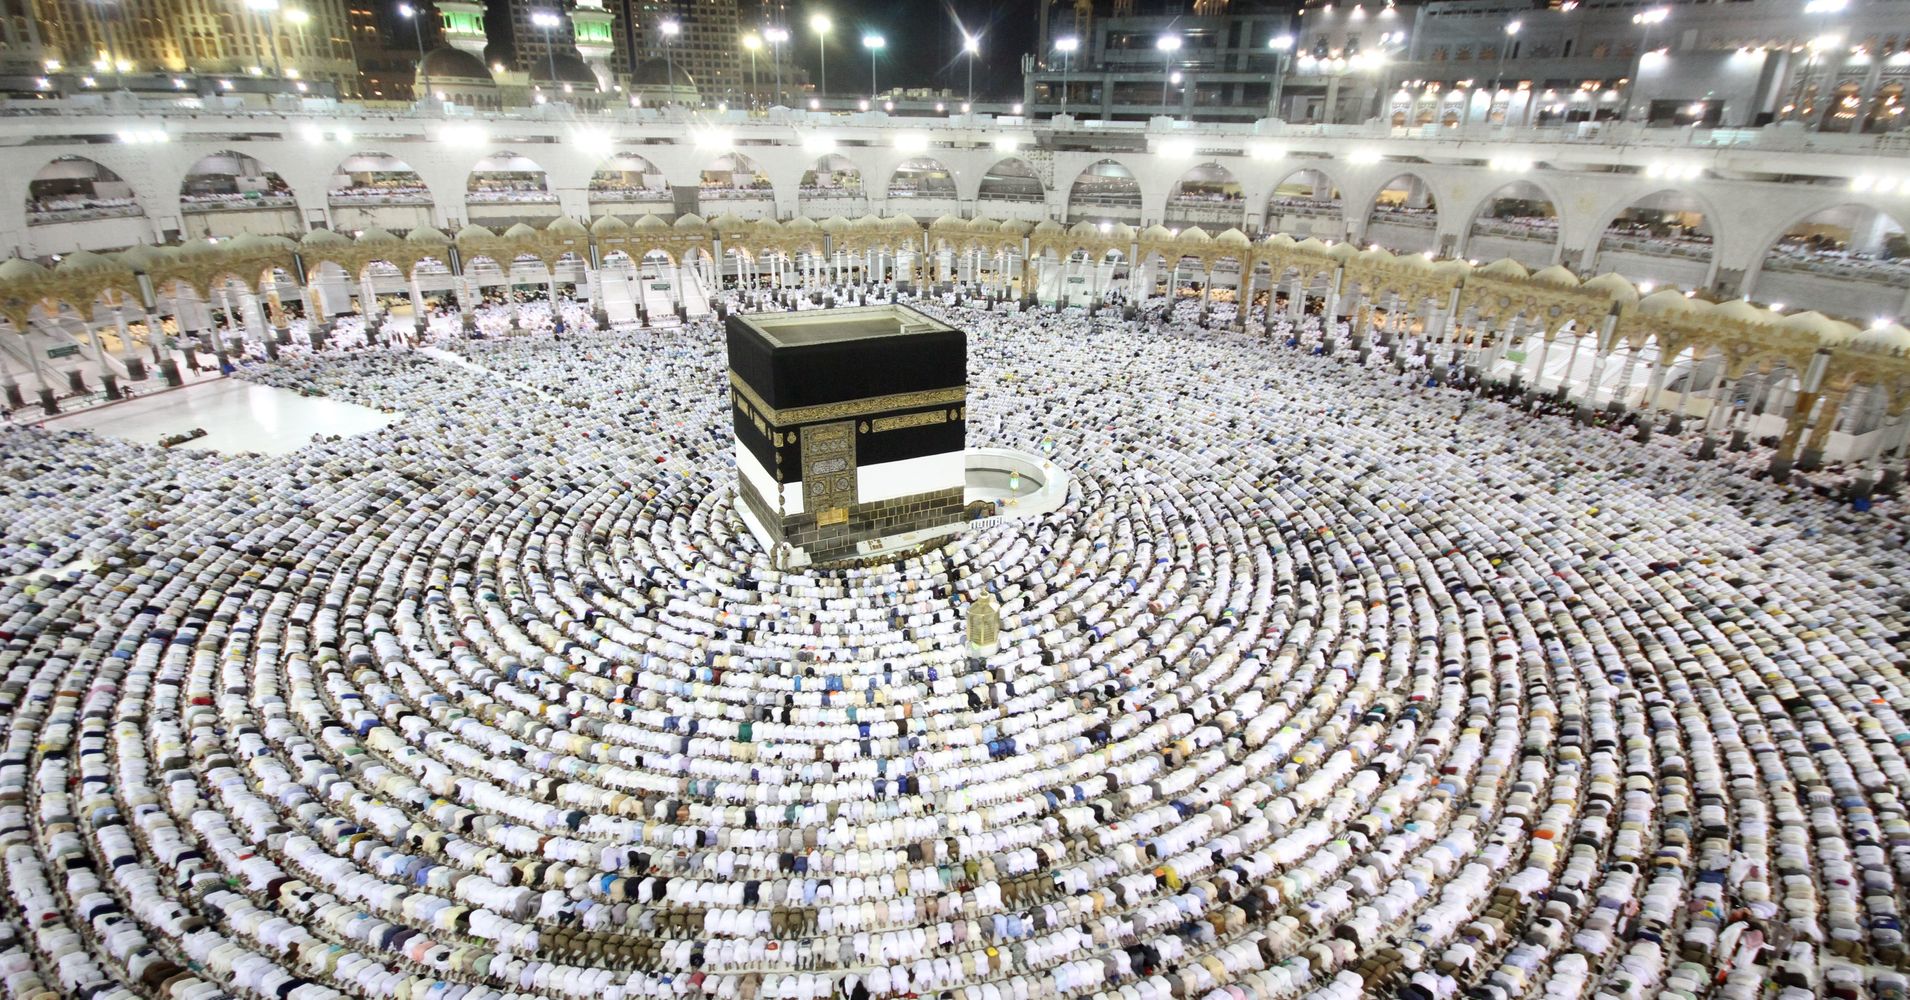 A Look At Mecca, Islam's Holiest Site, At The Height Of The Hajj